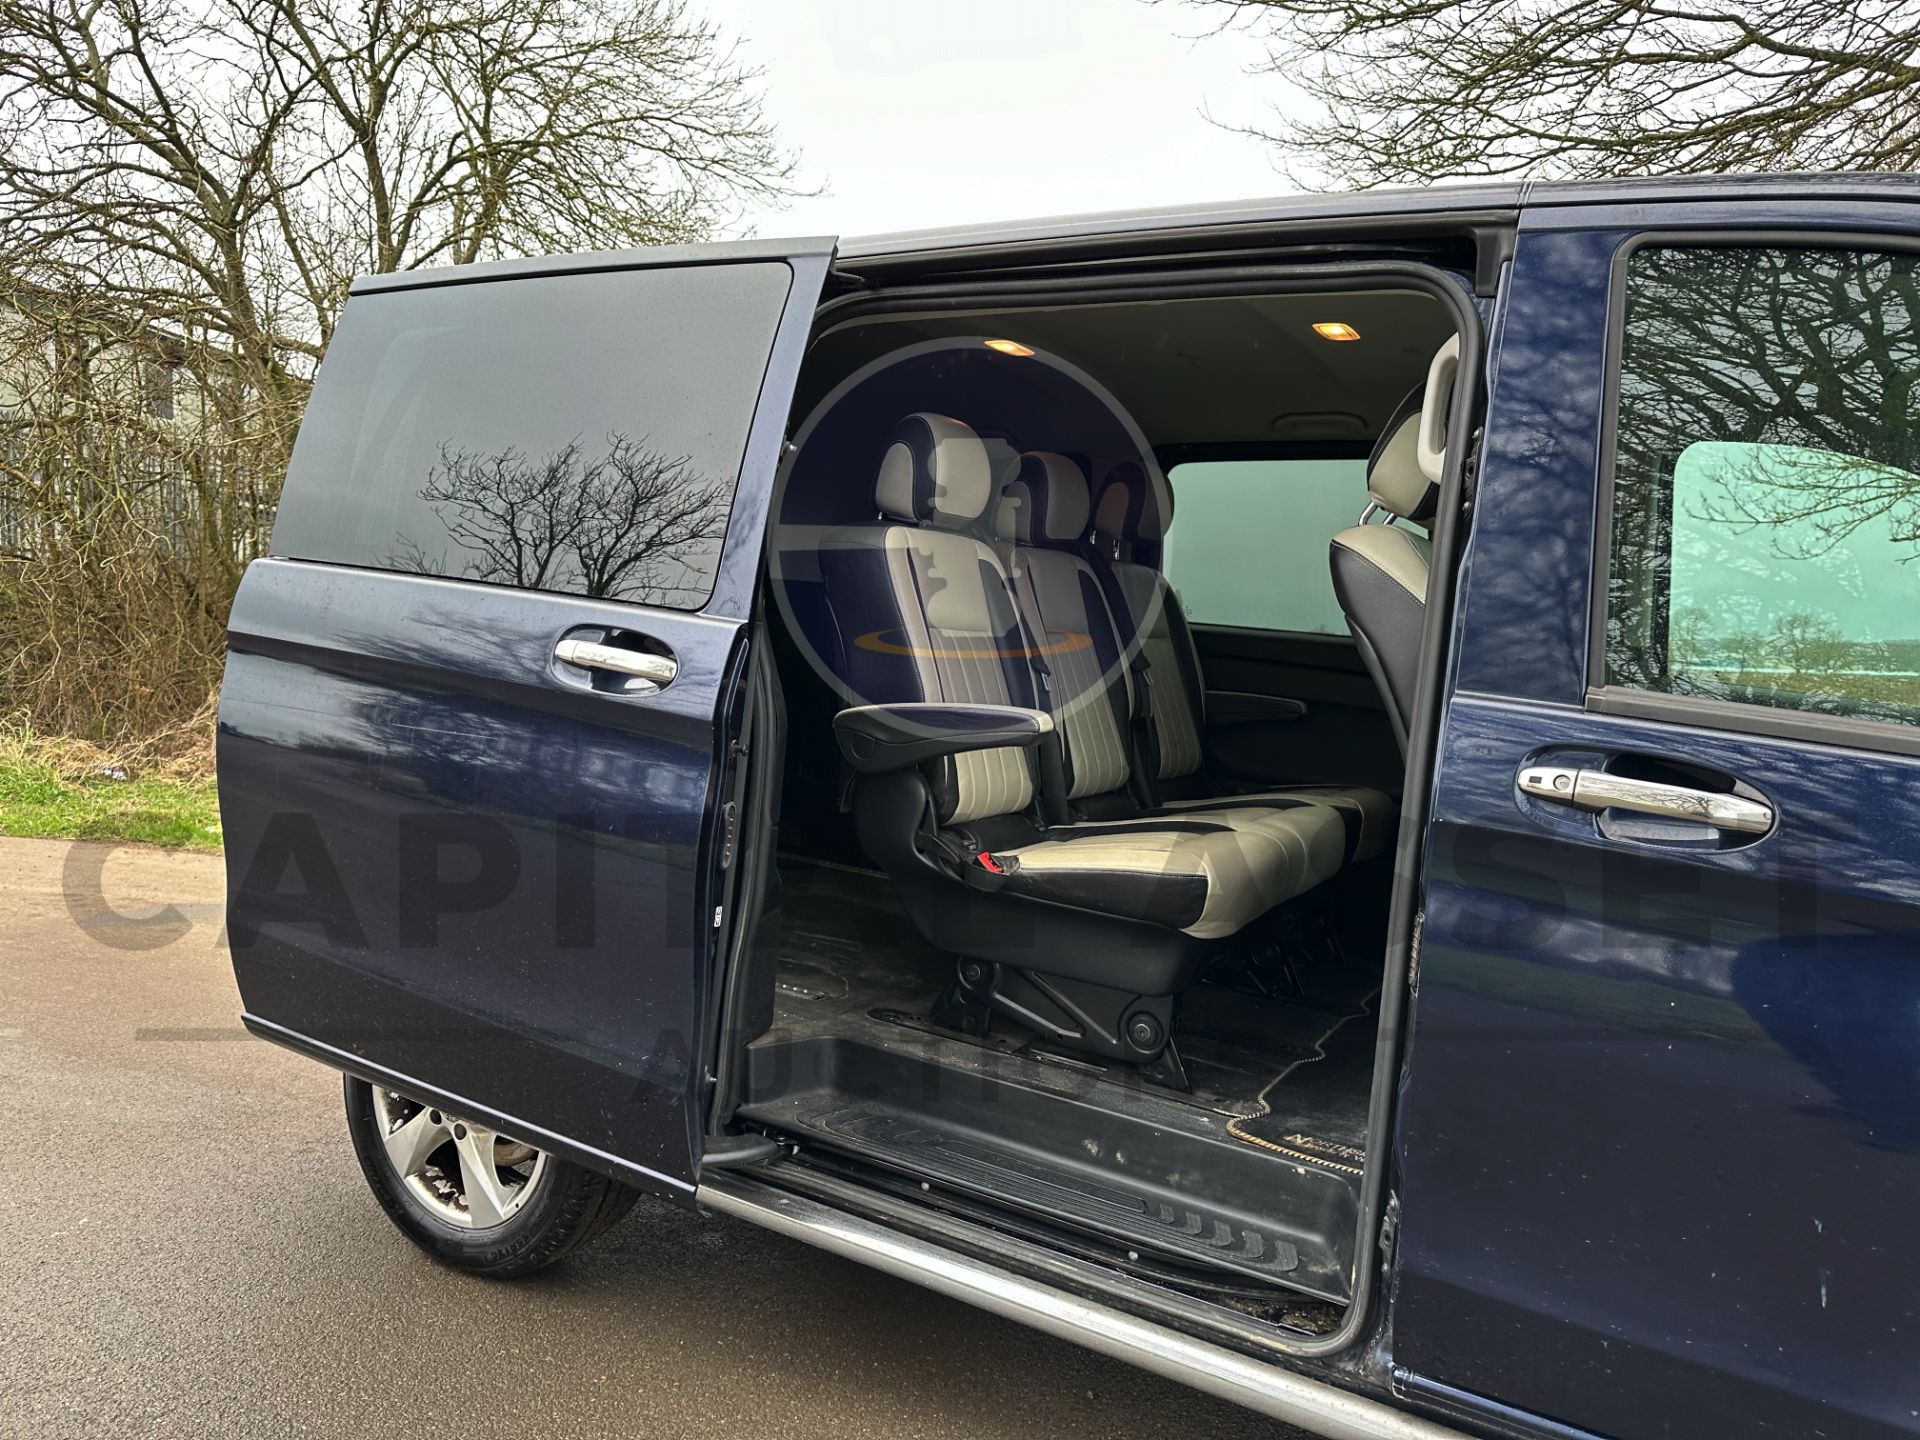 (ON SALE) MERCEDES-BENZ VITO 119 CDI AUTO *SWB - 5 SEATER DUALINER* (2019 - EURO 6) *SPORT EDITION* - Image 25 of 44